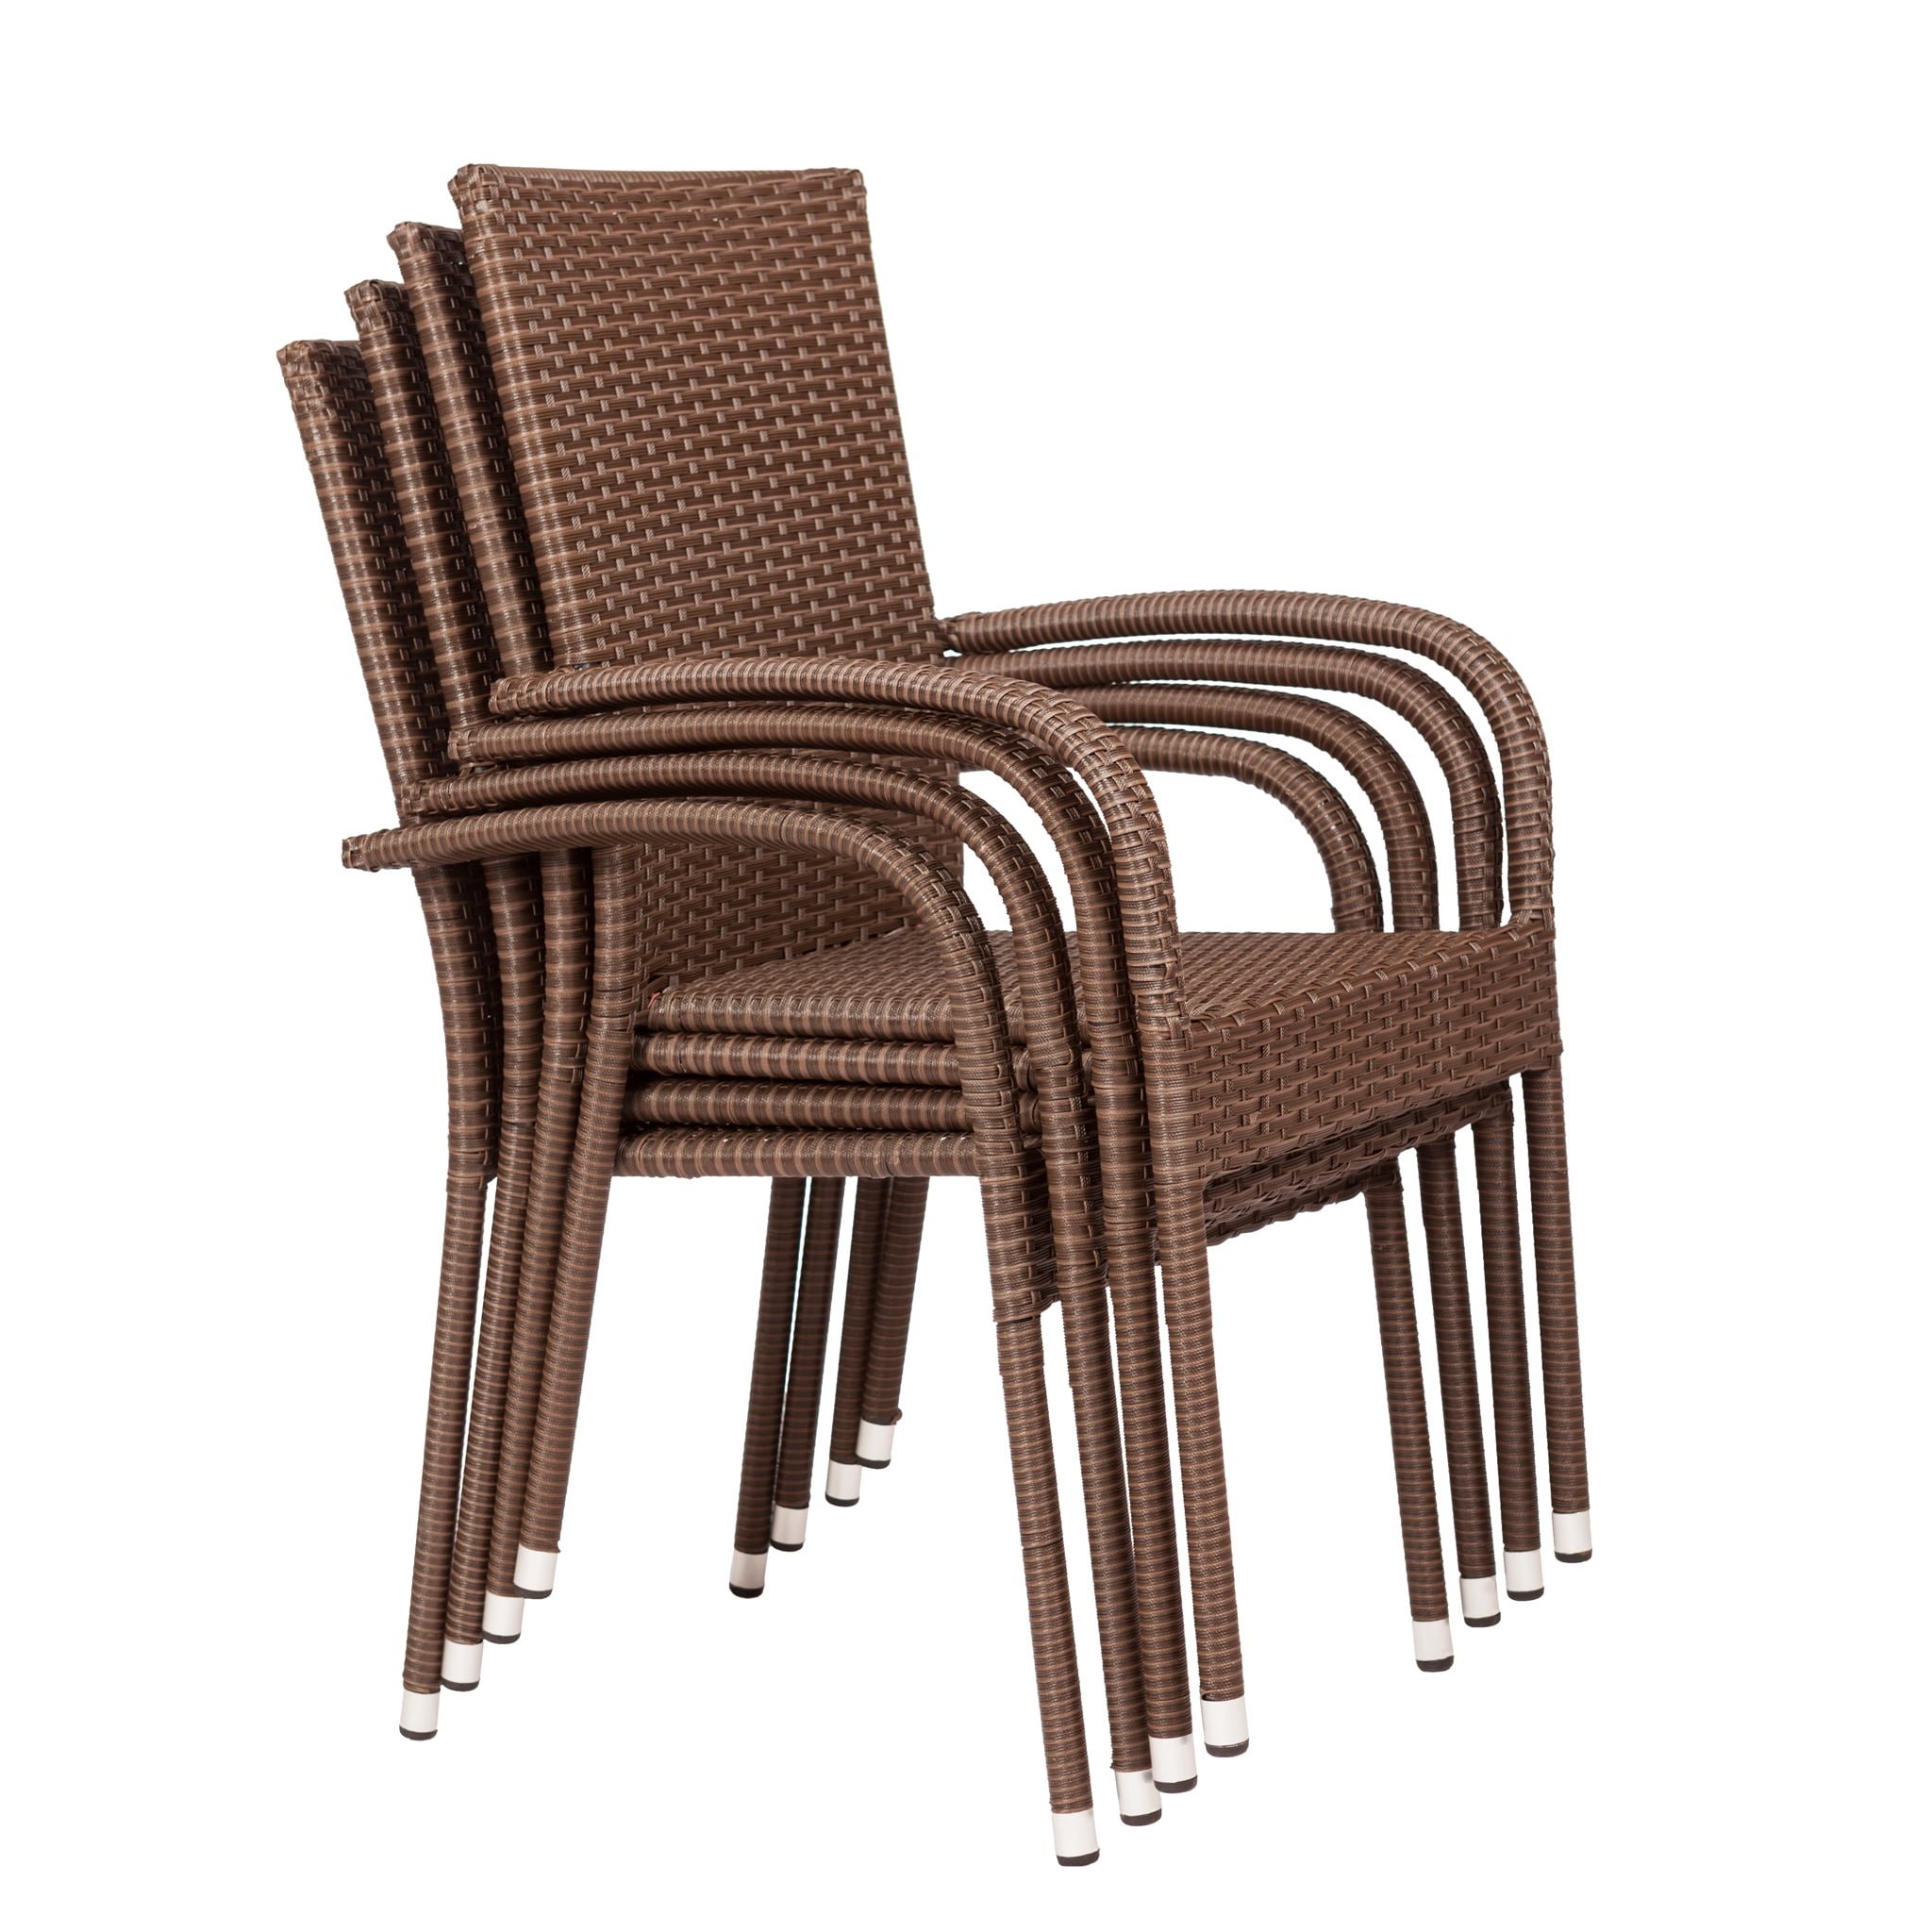 Morgan Outdoor Dining Chair Resin, Cool Outdoor Dining Chairs